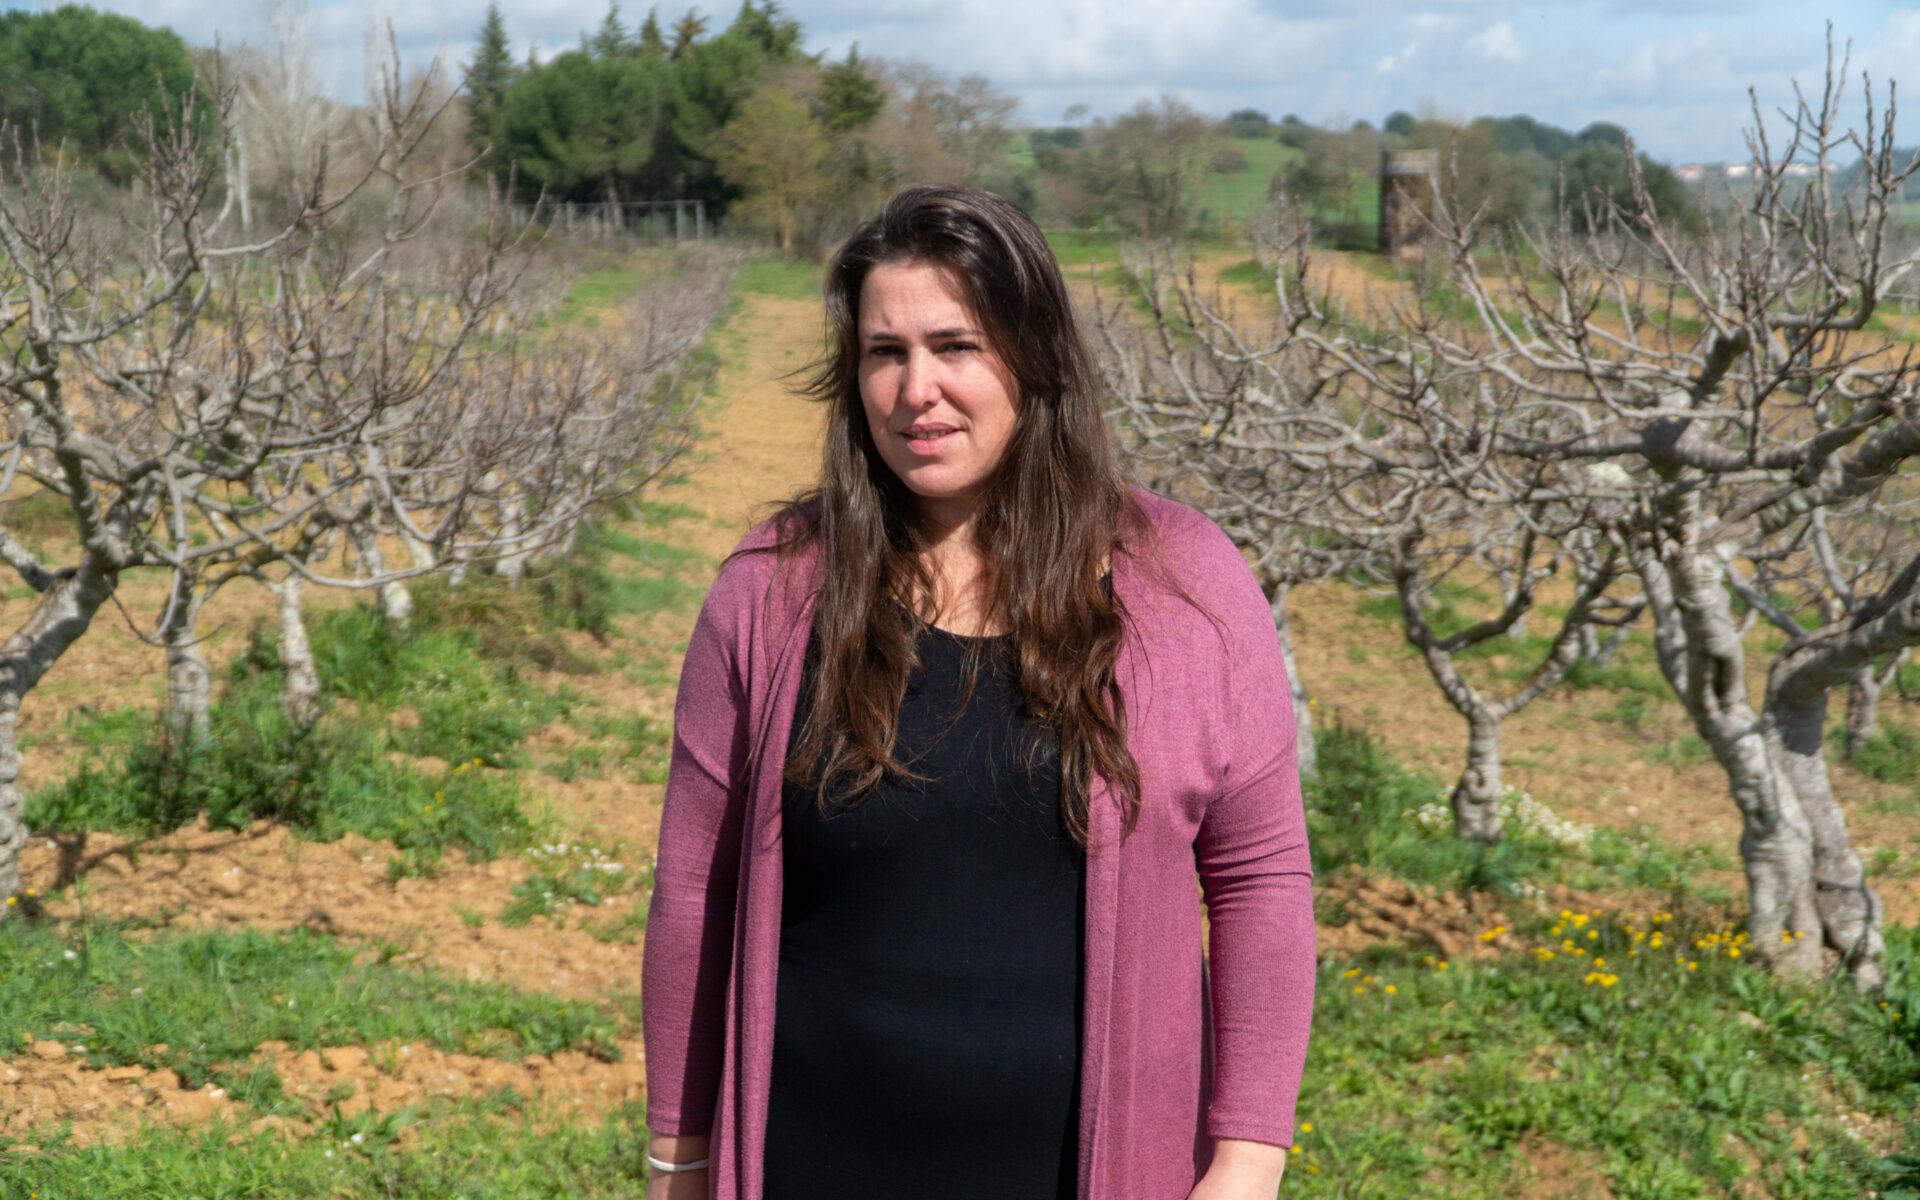 Liliana Felício, a social worker and coordinator of the CRIT’s training and employment sector.